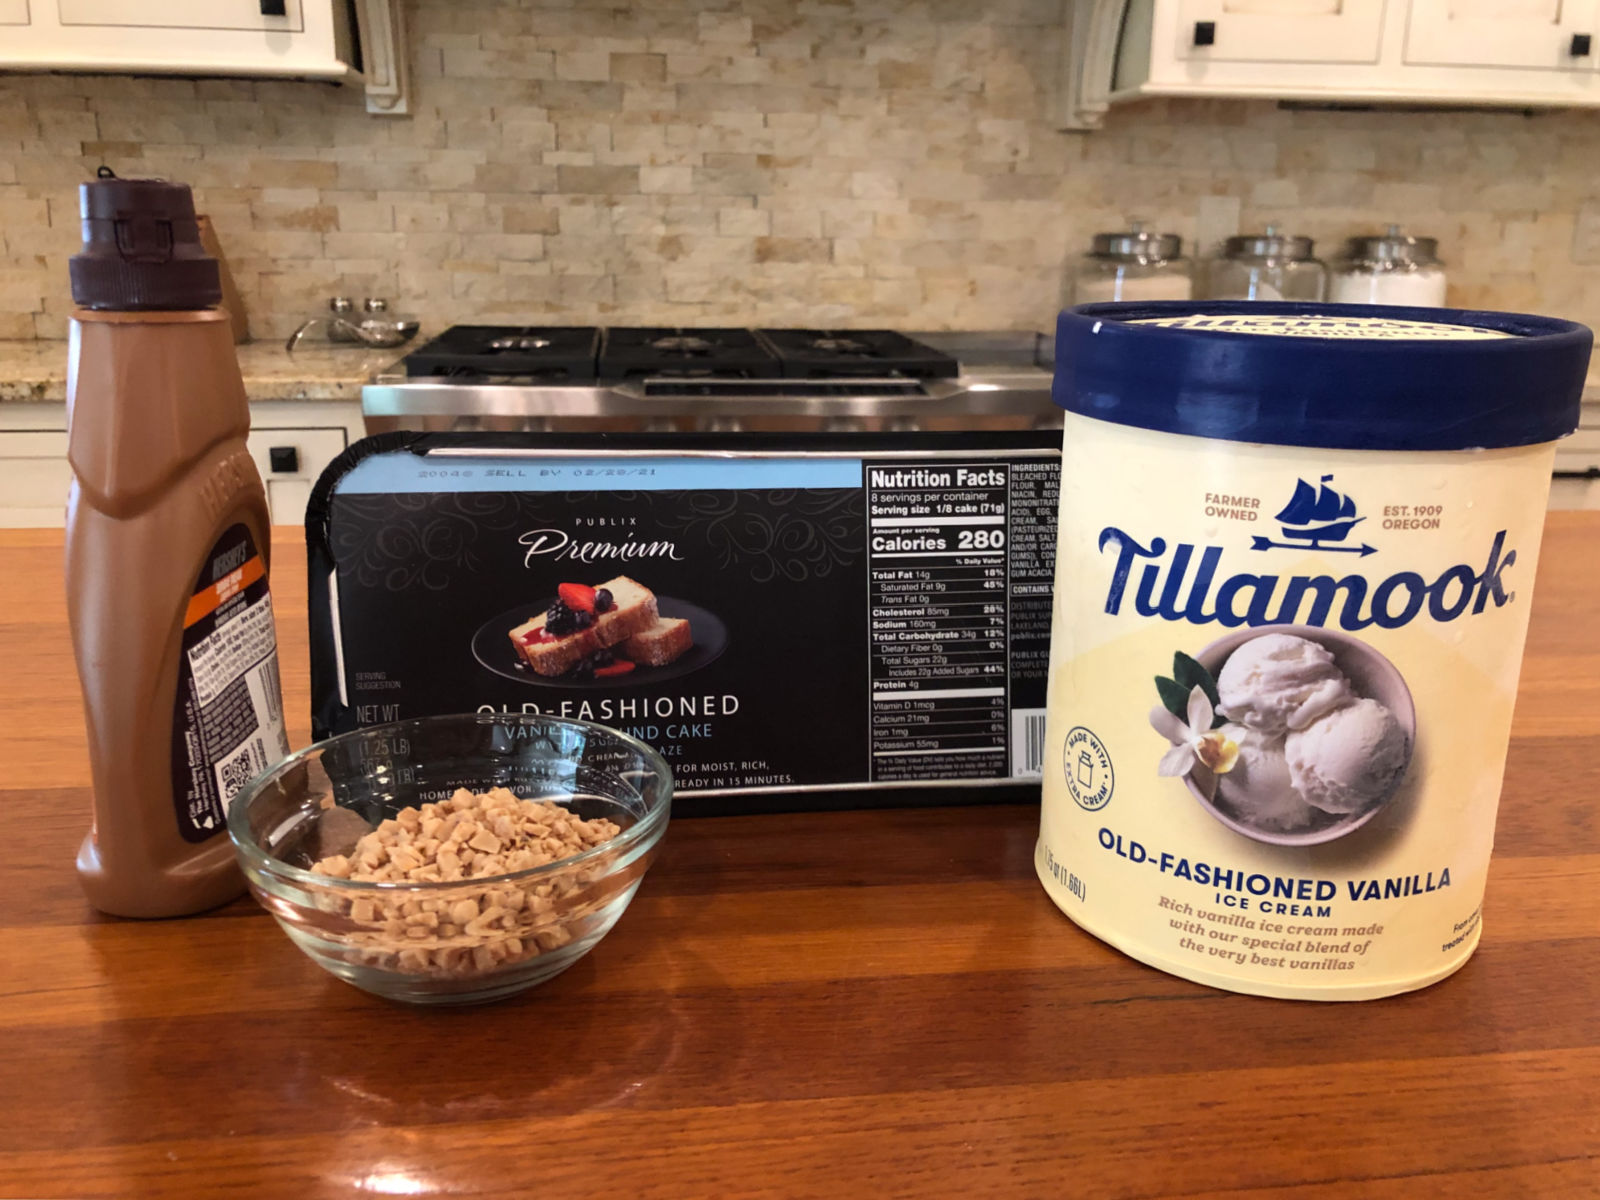 Grilled Pound Cake With Tillamook Ice Cream - Easiest End Of Summer Dessert! on I Heart Publix 1